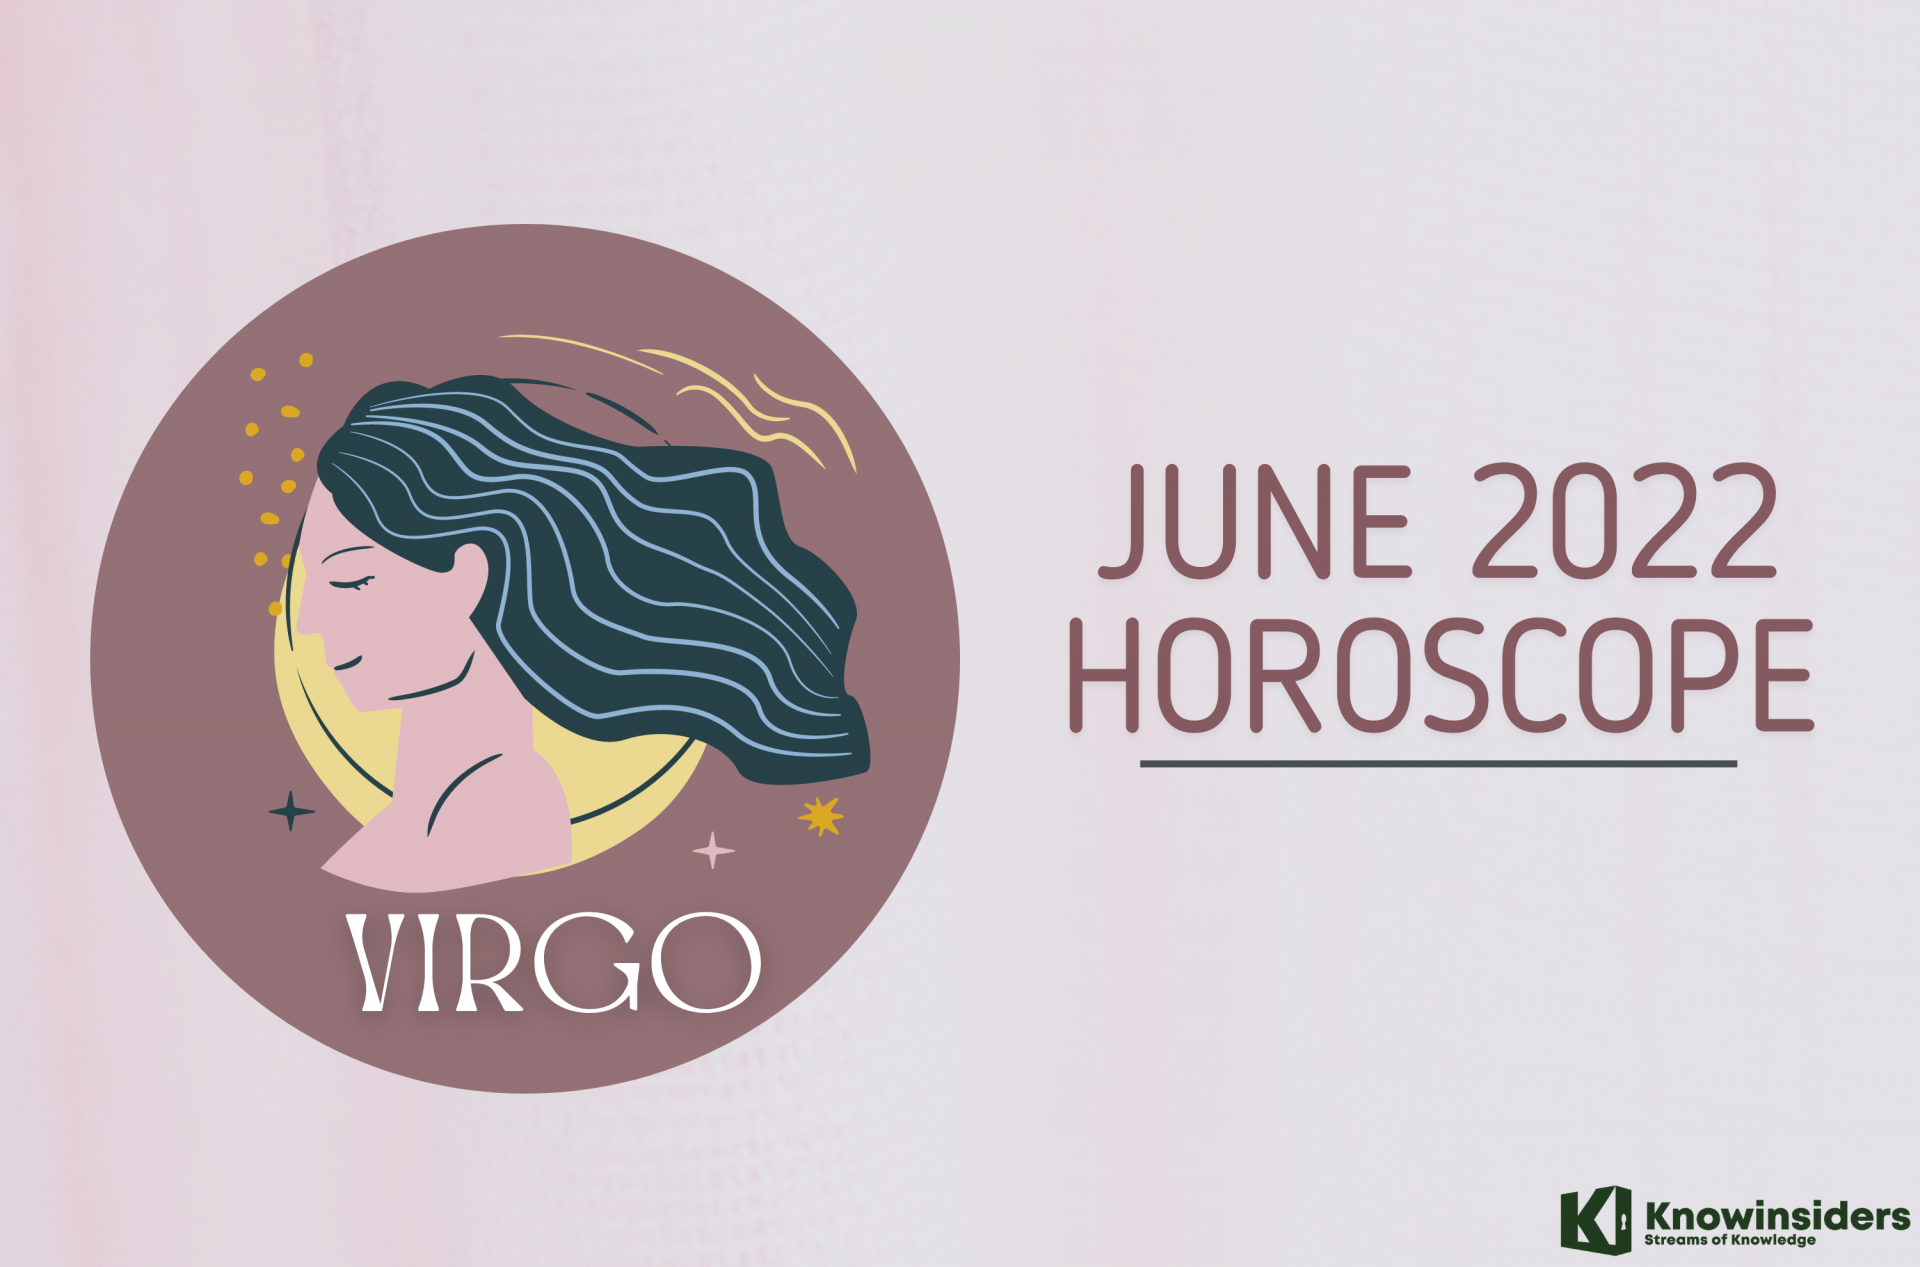 Love Monthly Horoscope June 2022: Astrological Prediction For 12 Zodiac Signs